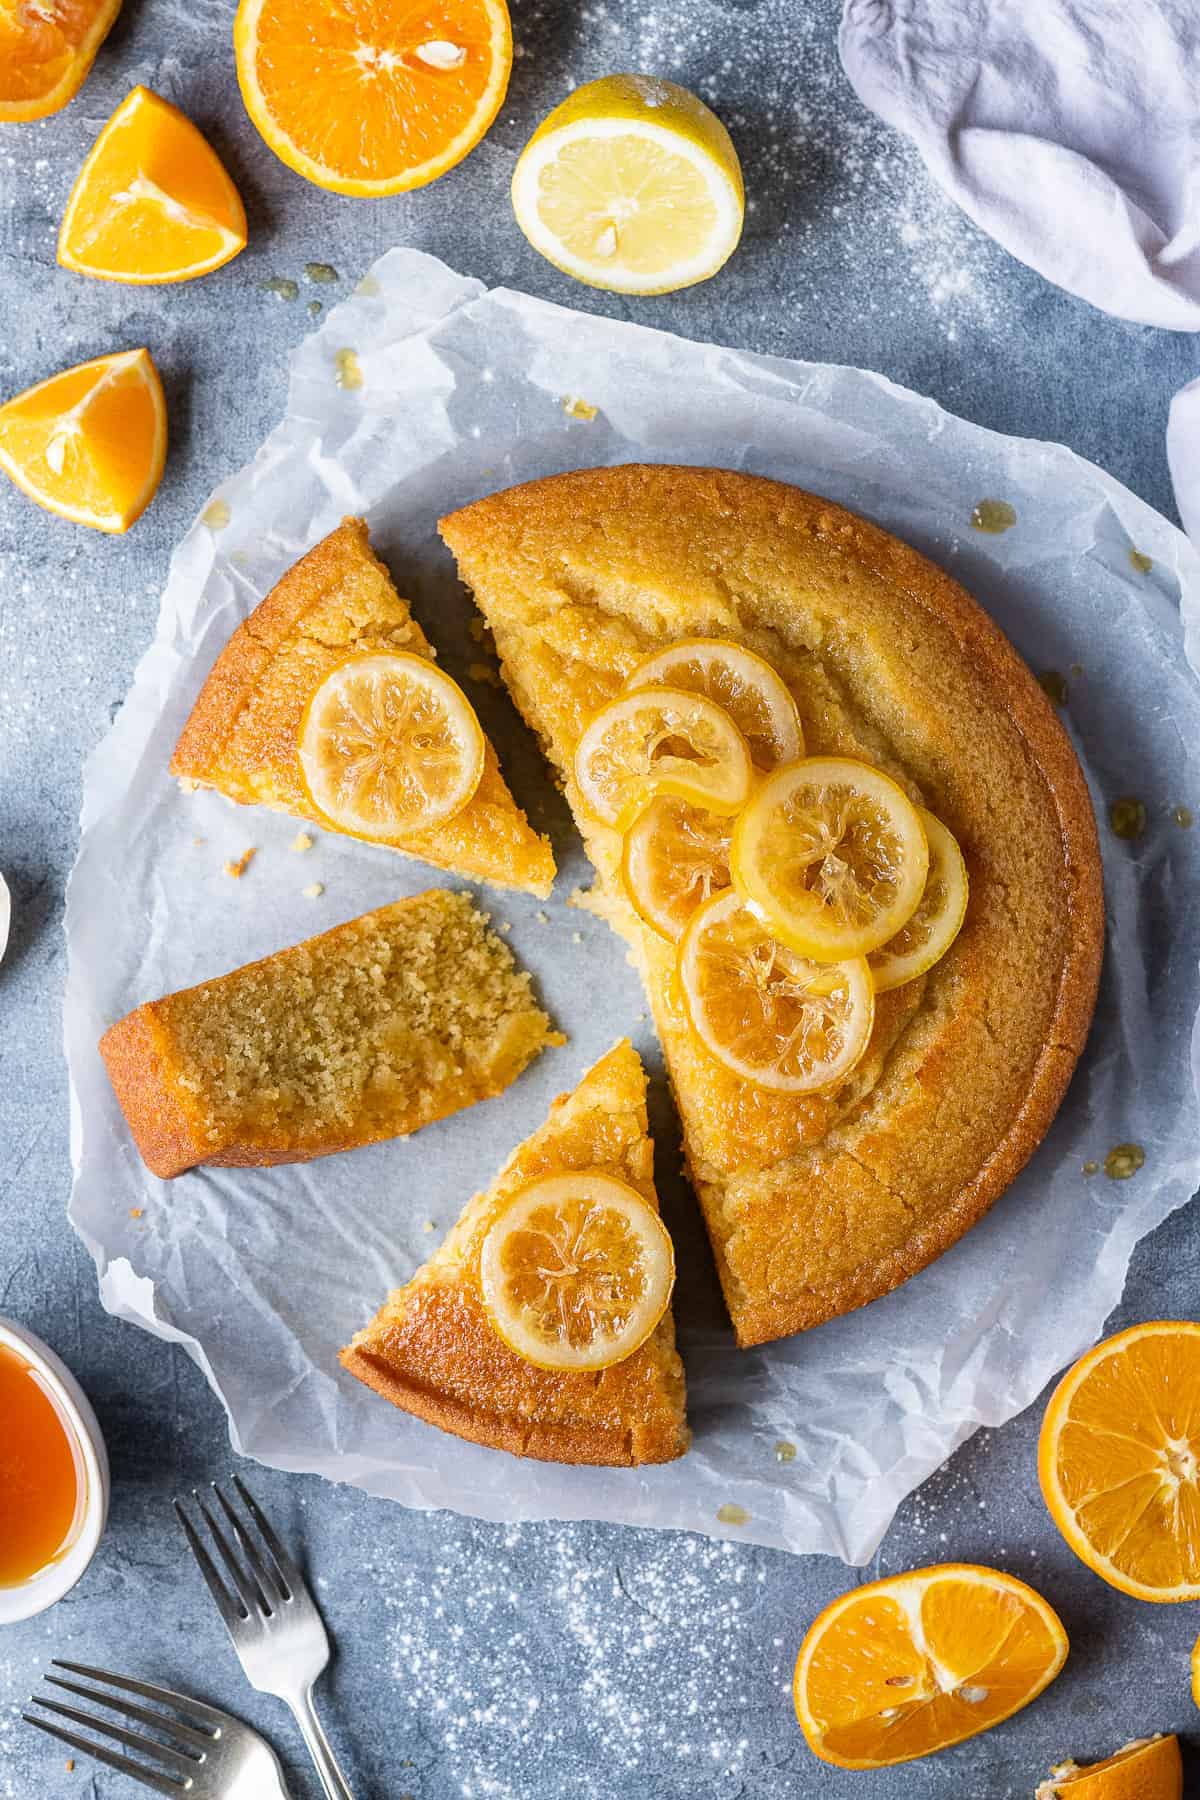 Vegan semolina cake cut into slices on a sheet of baking parchment on a grey background with sliced oranges and lemons